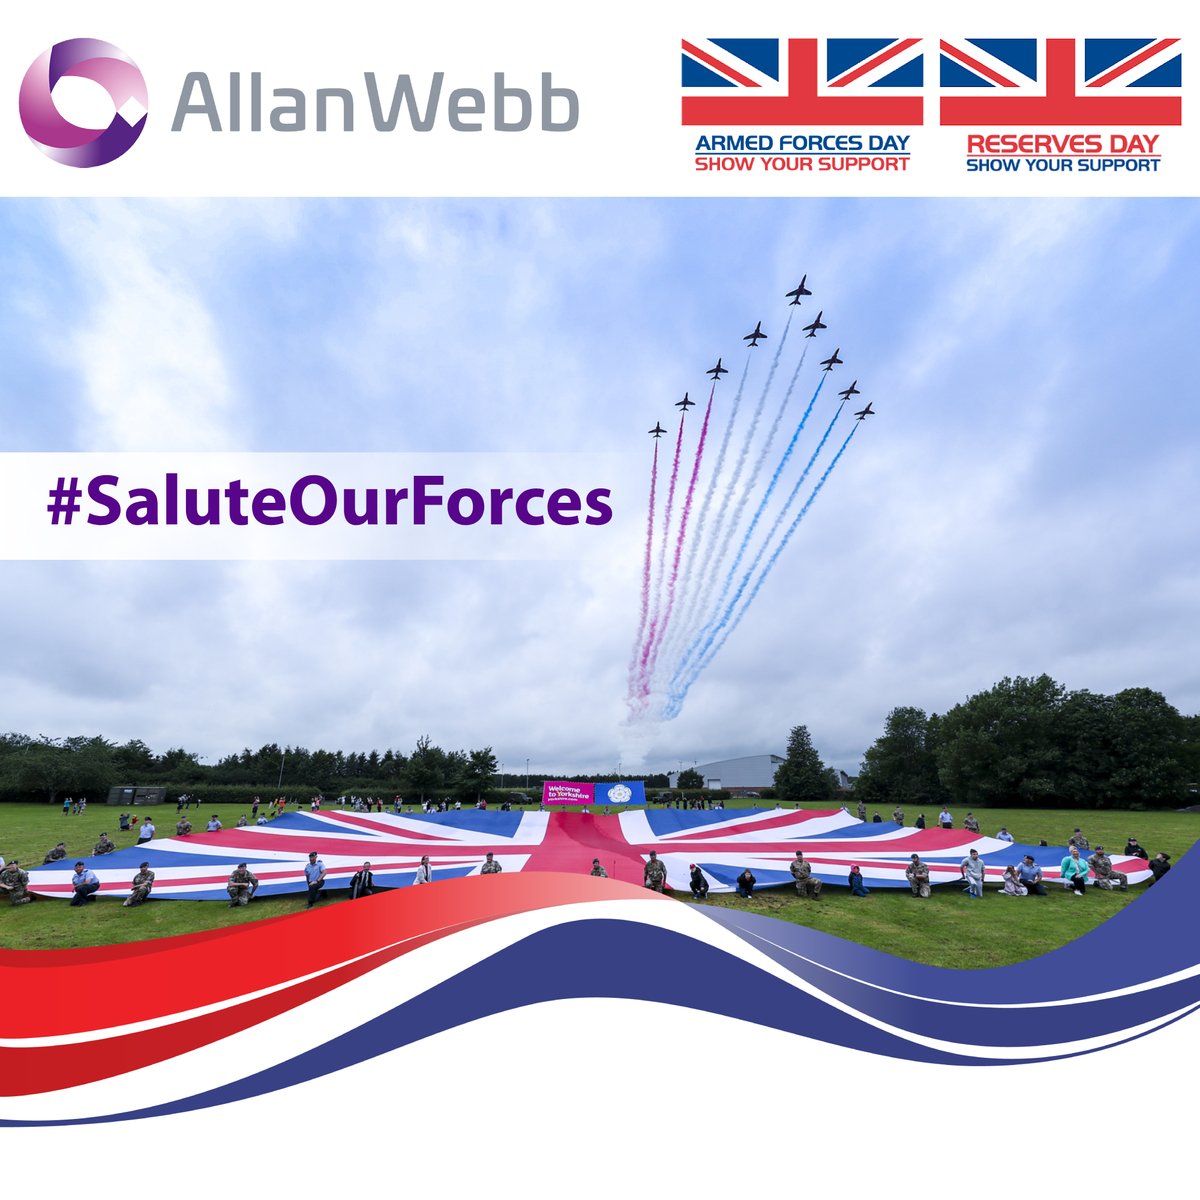 We're honoured to be part of the Employer Recognition Scheme for the Reserve Forces. Reservists are deployed worldwide, and are integral to the nation's security at home and overseas. Today we #SaluteOurForces #ArmedForcesDay